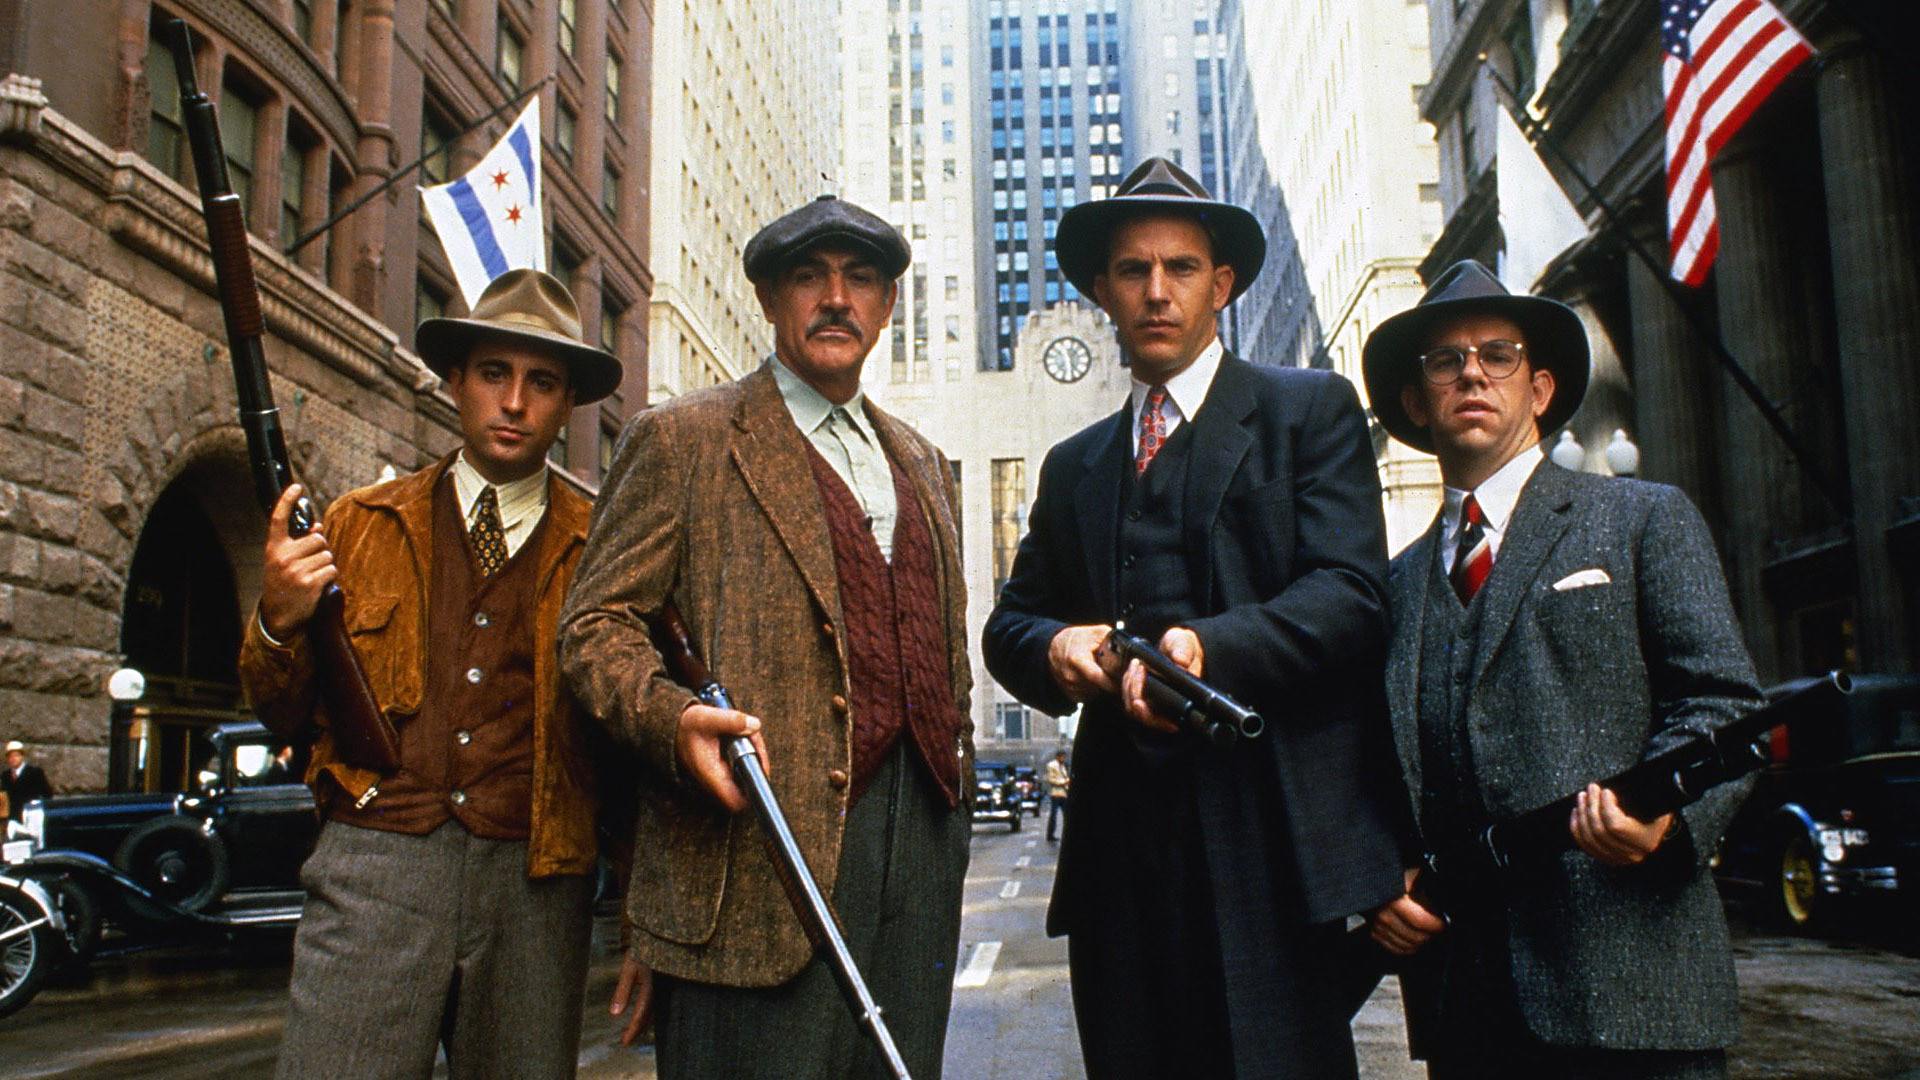 The cast of the Untouchables, posing in a city street and wielding various guns